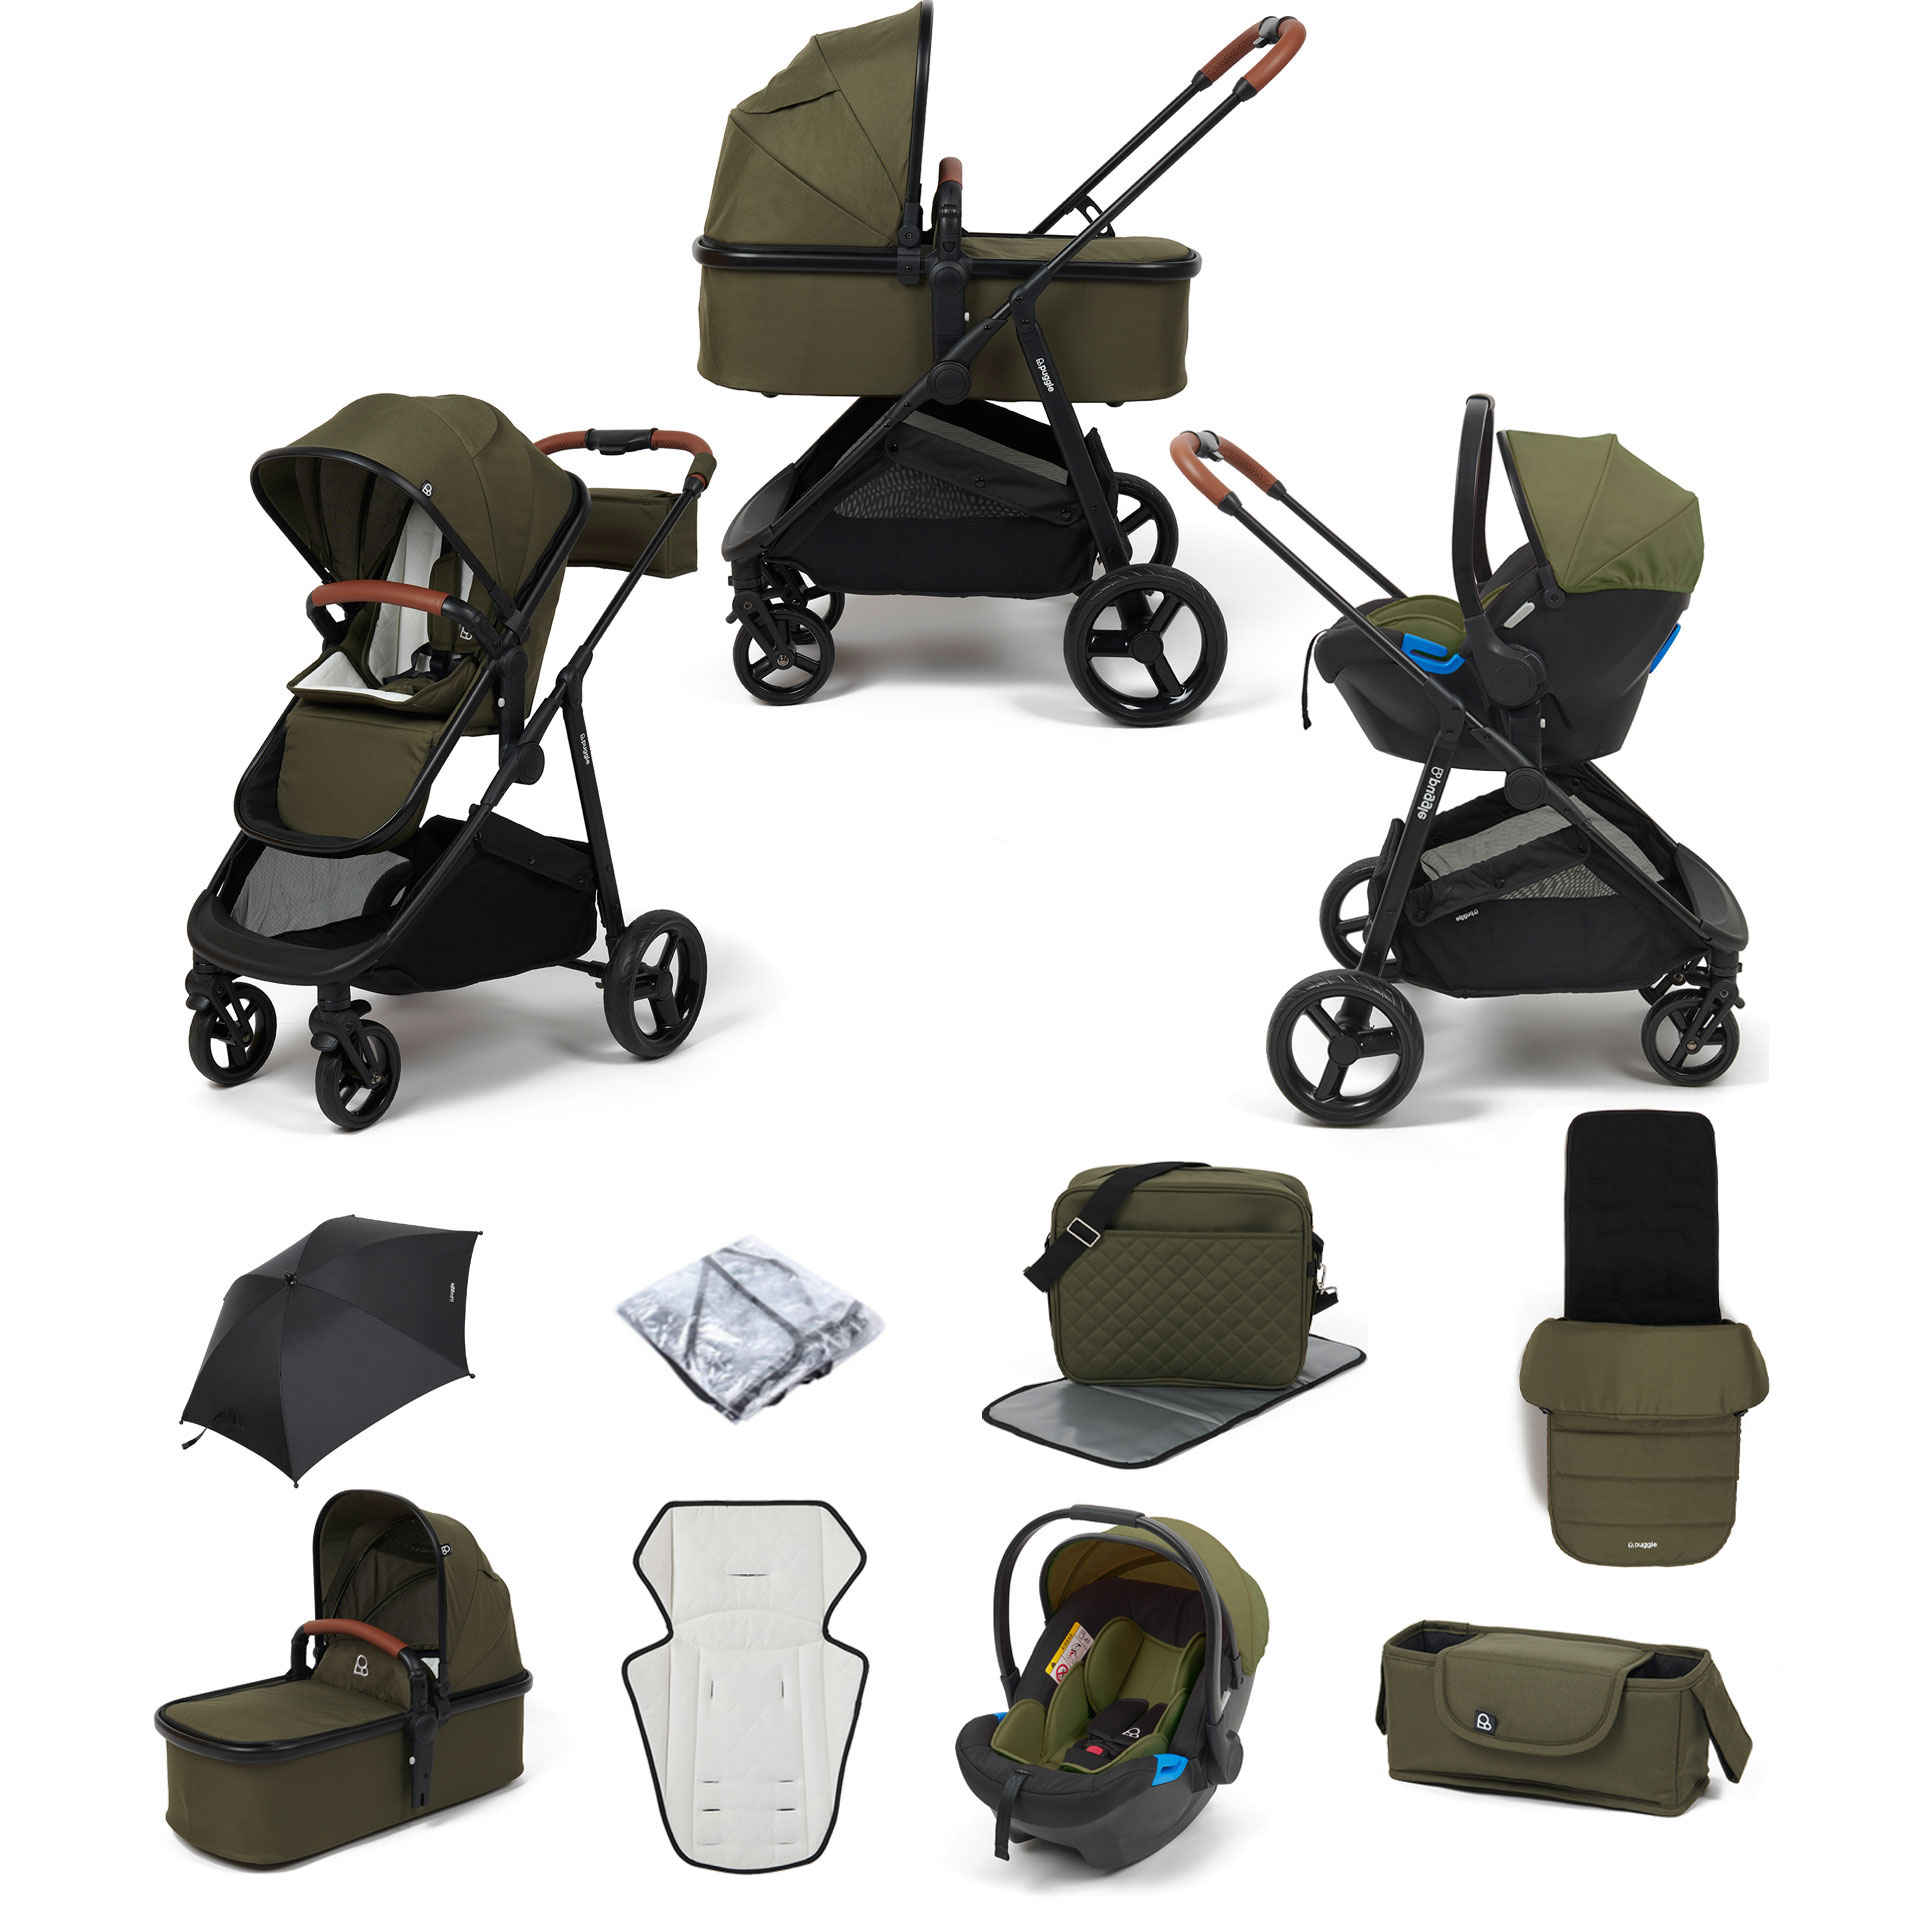 Puggle Monaco XT 3in1 Travel System with Organiser, Parasol, Footmuff & Changing Bag - Forest Green